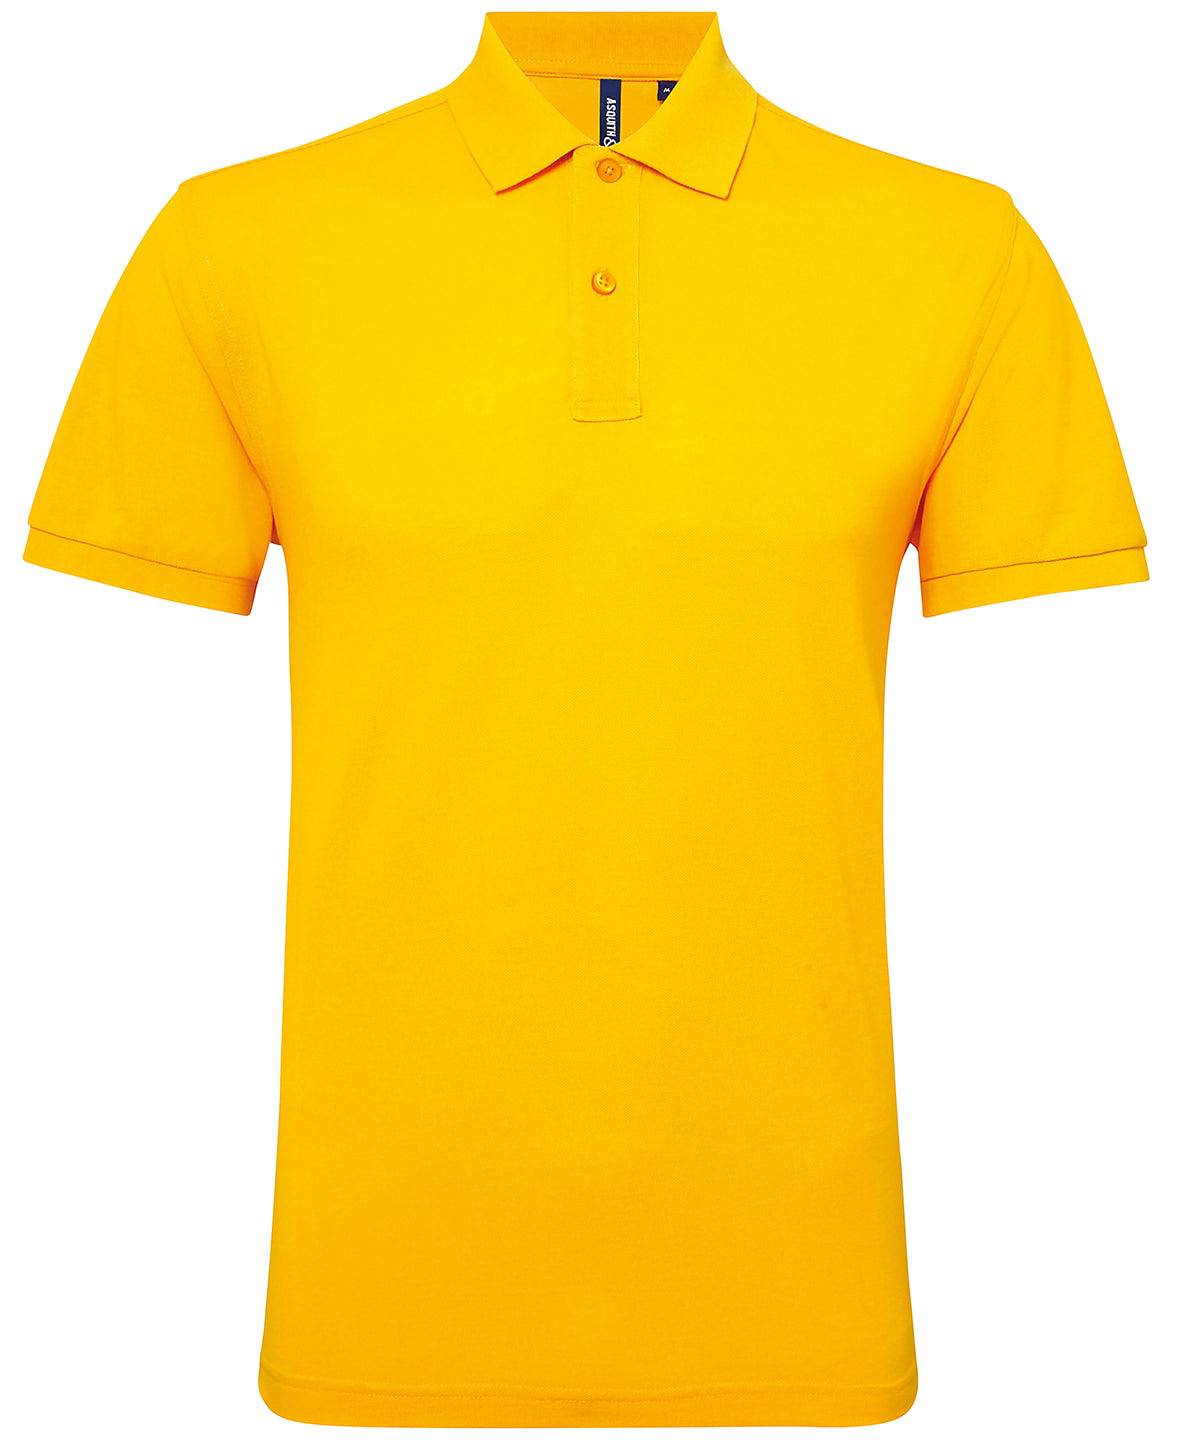 Load image into Gallery viewer, Sunflower - Men’s polycotton blend polo
